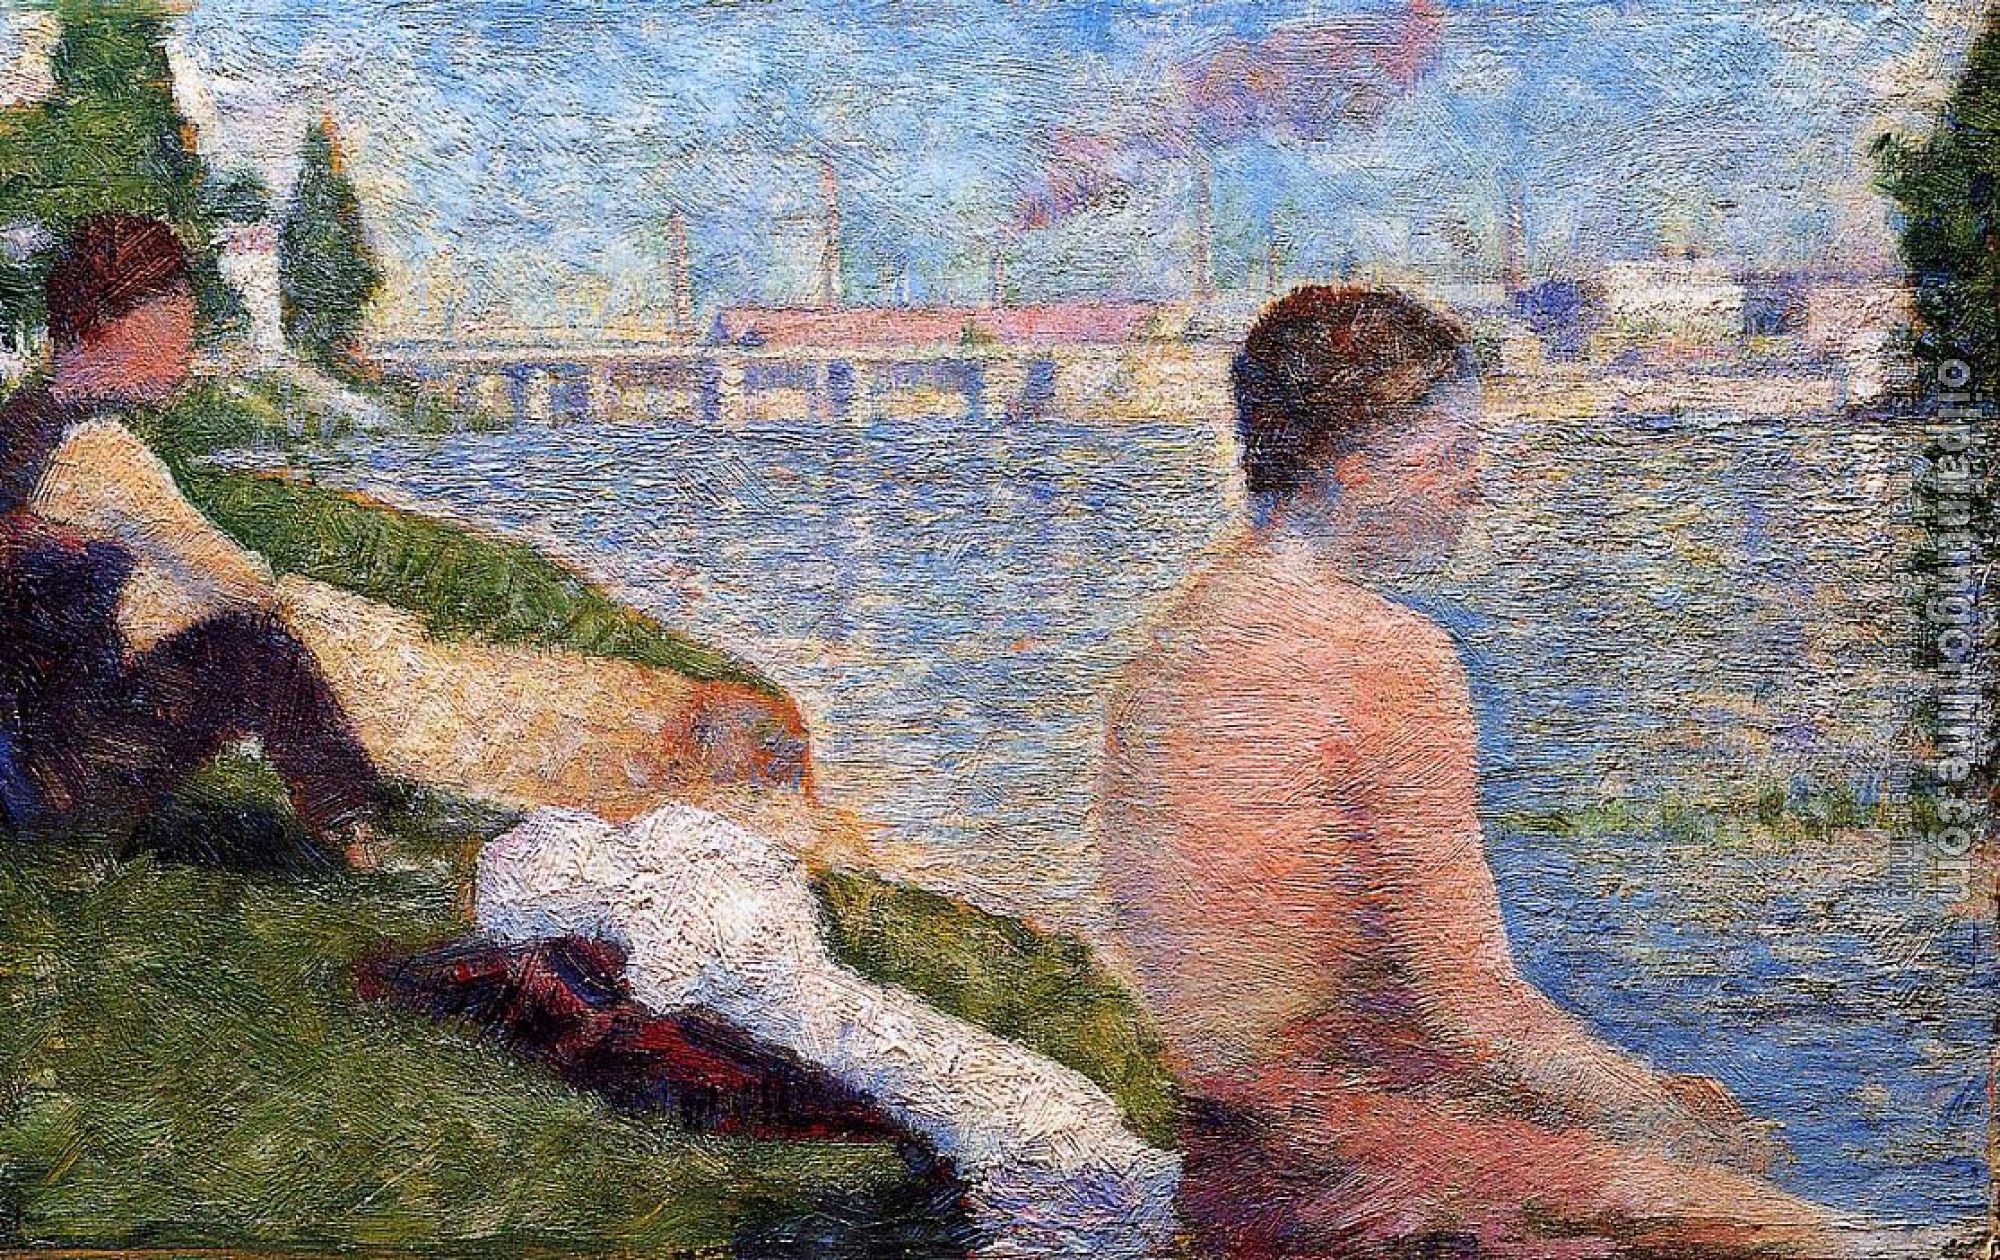 Seurat, Georges - Bathing at Asnieres, Seated Bather